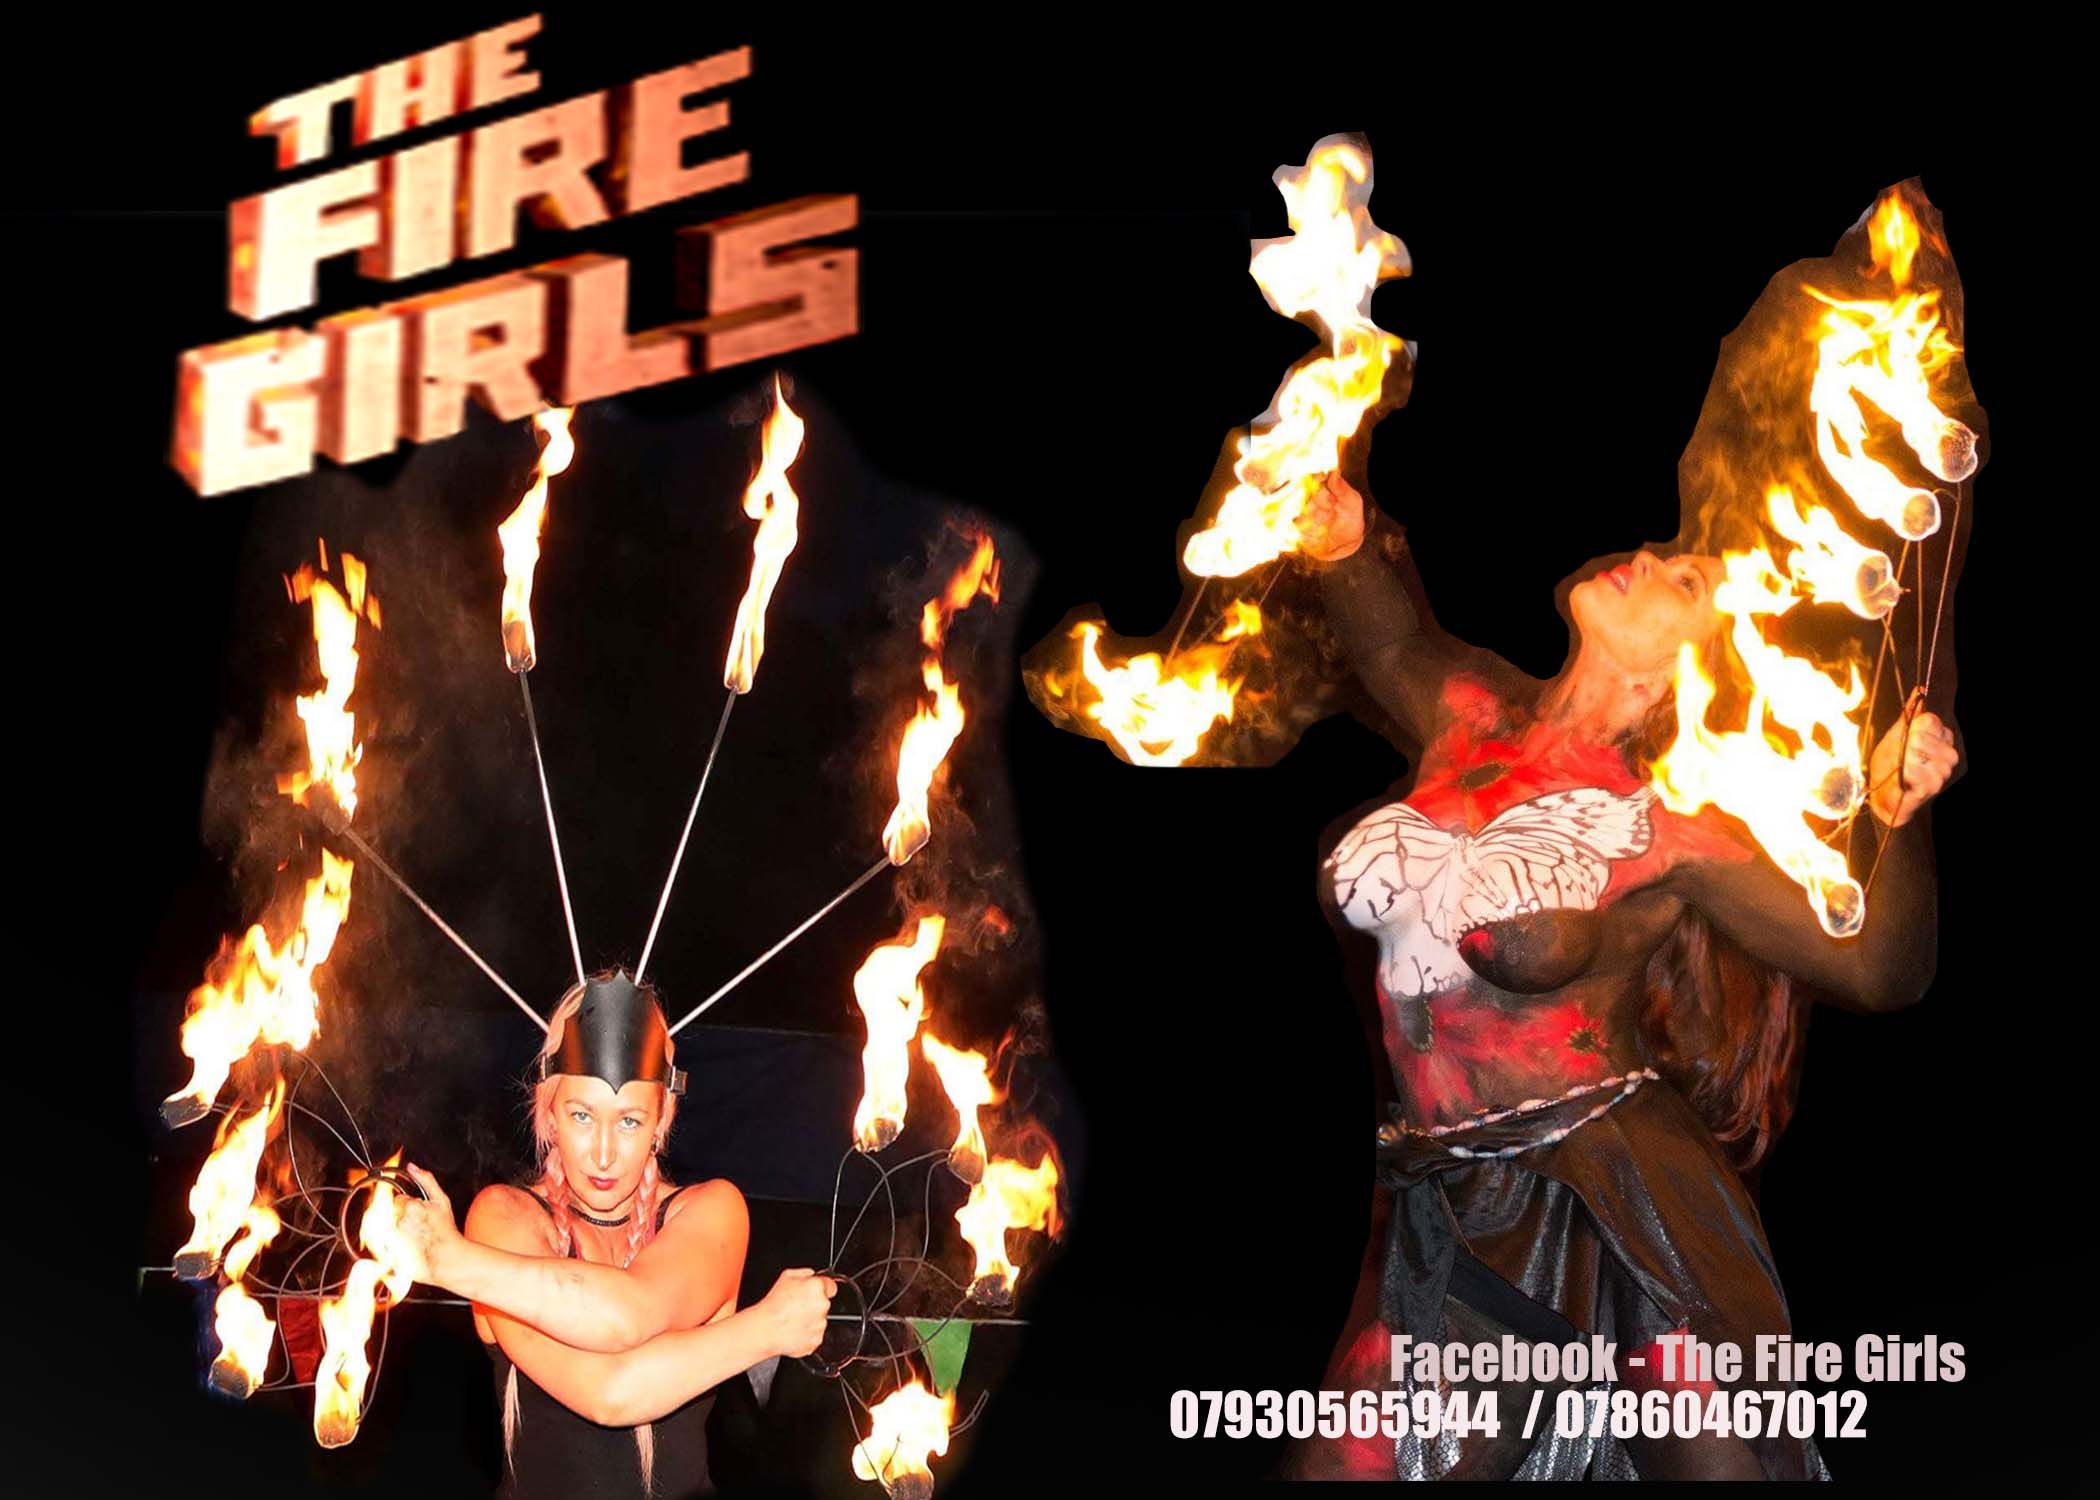 the fire girls cover banner with numbers.jpg